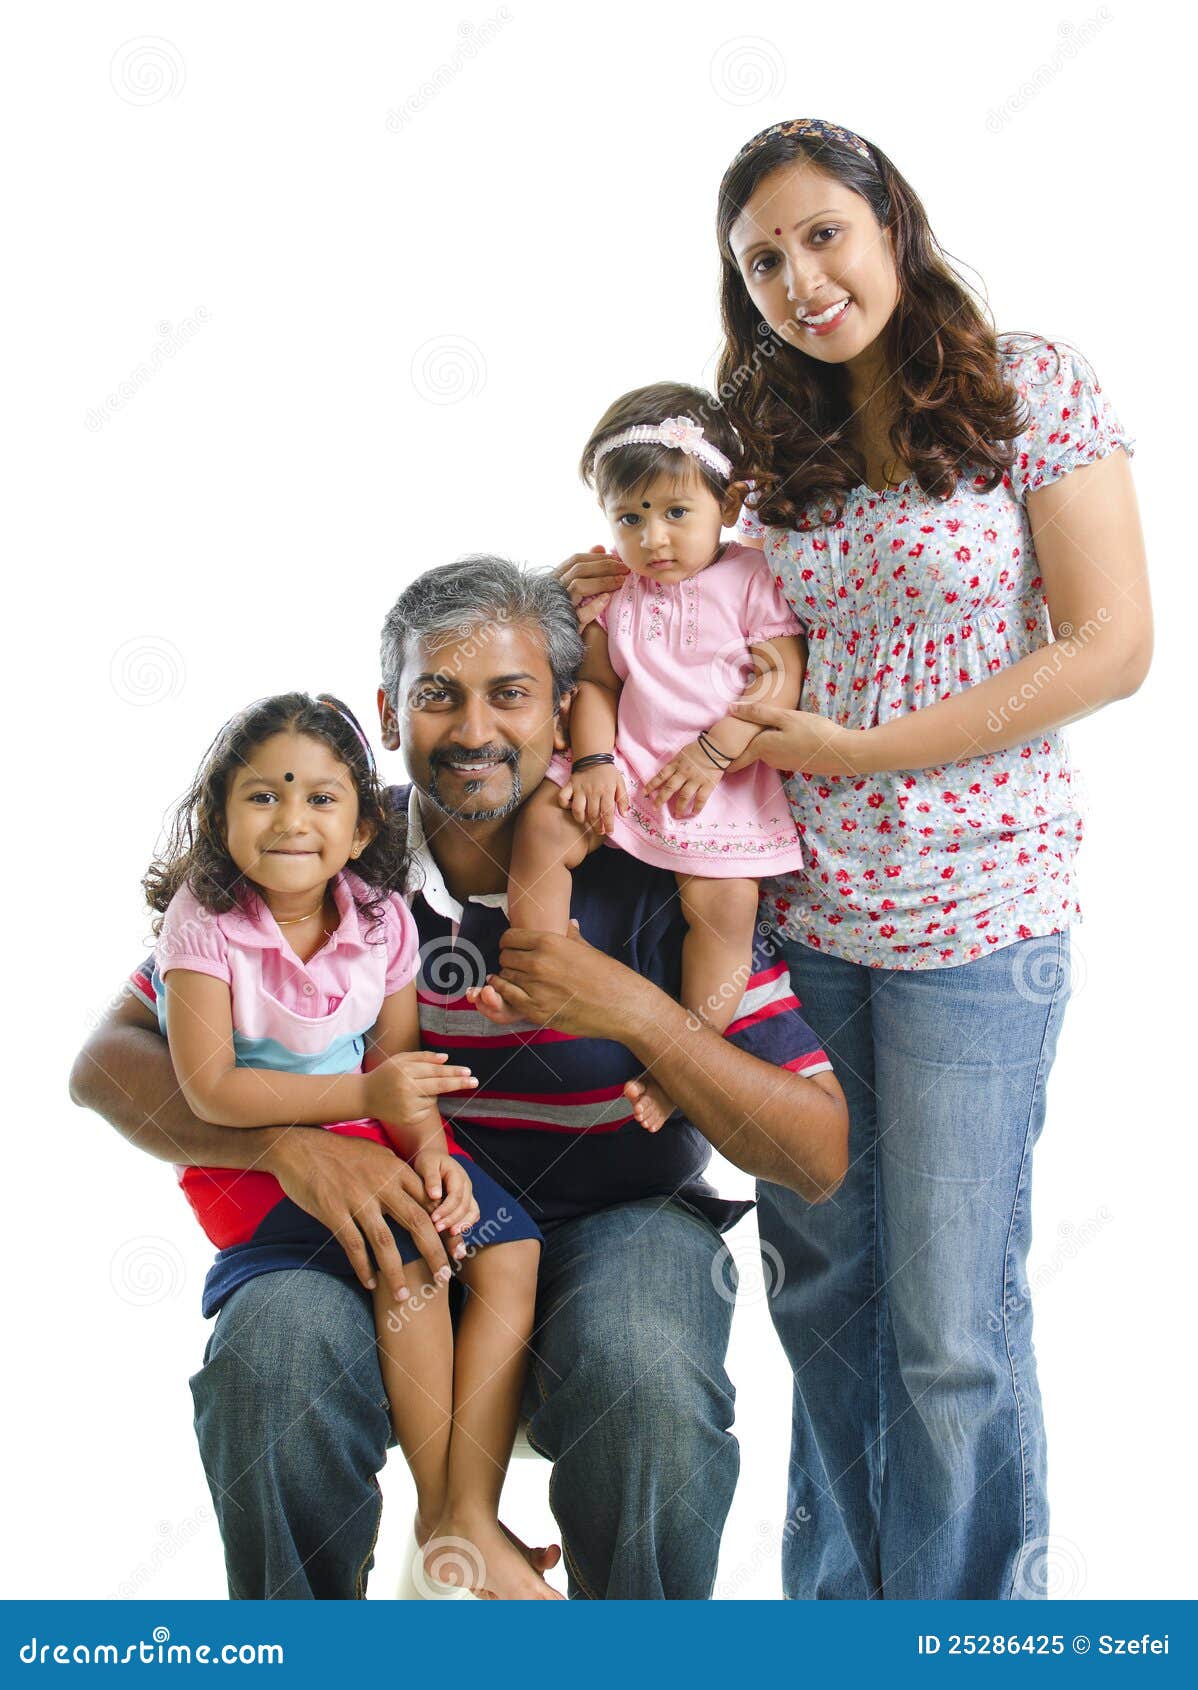 Premium Photo | An indian family poses for a portrait in front of a blue  background